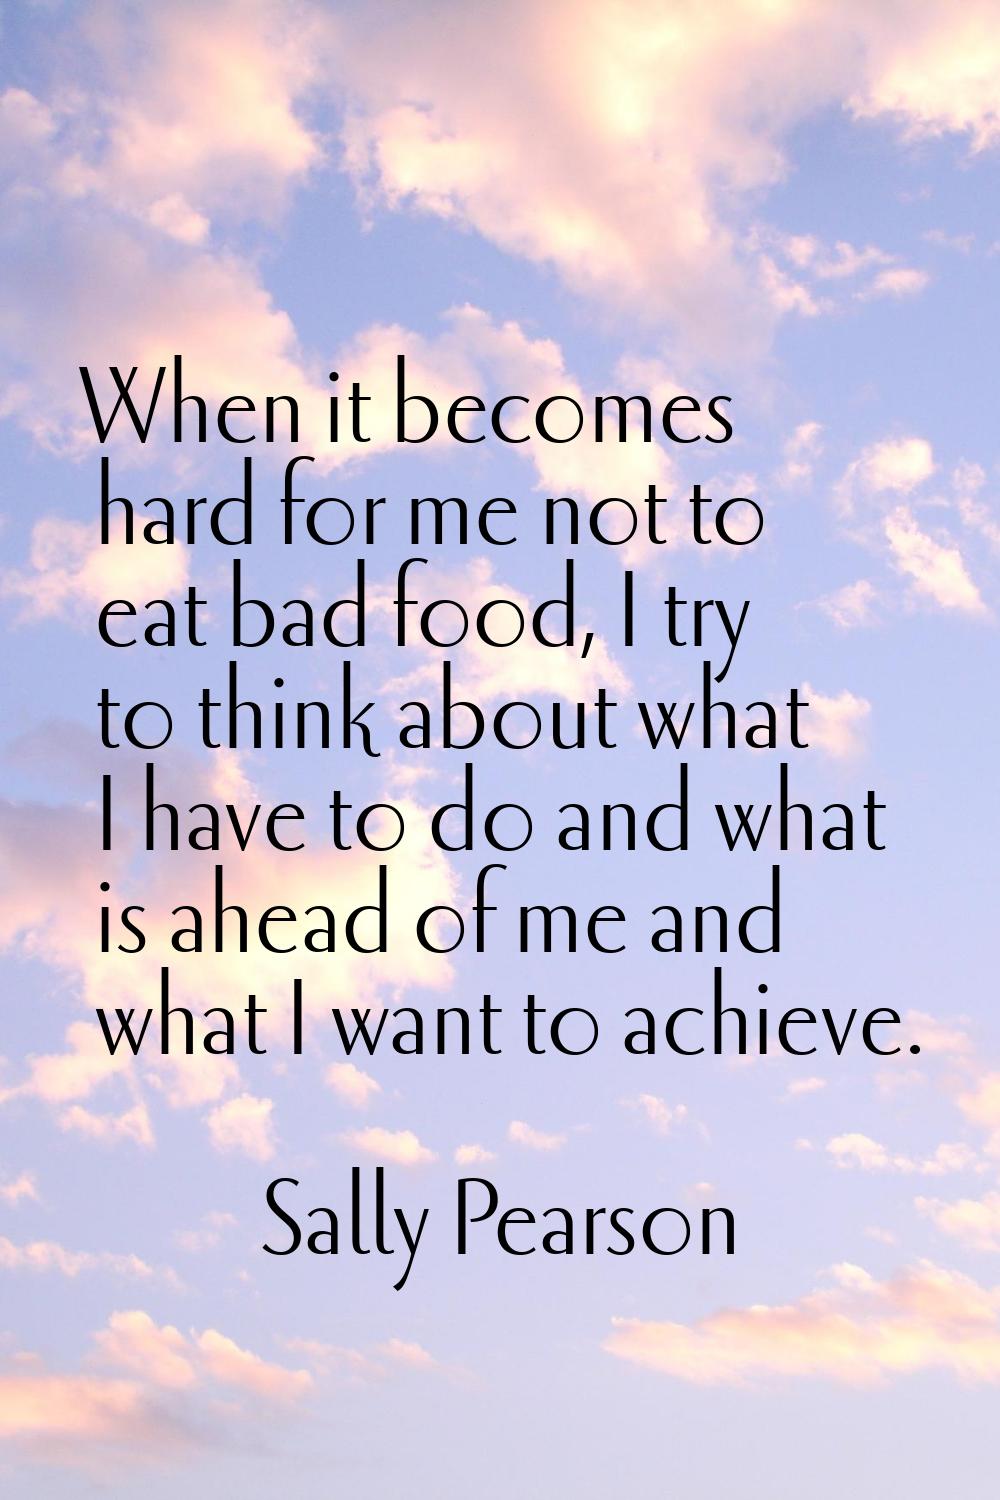 When it becomes hard for me not to eat bad food, I try to think about what I have to do and what is